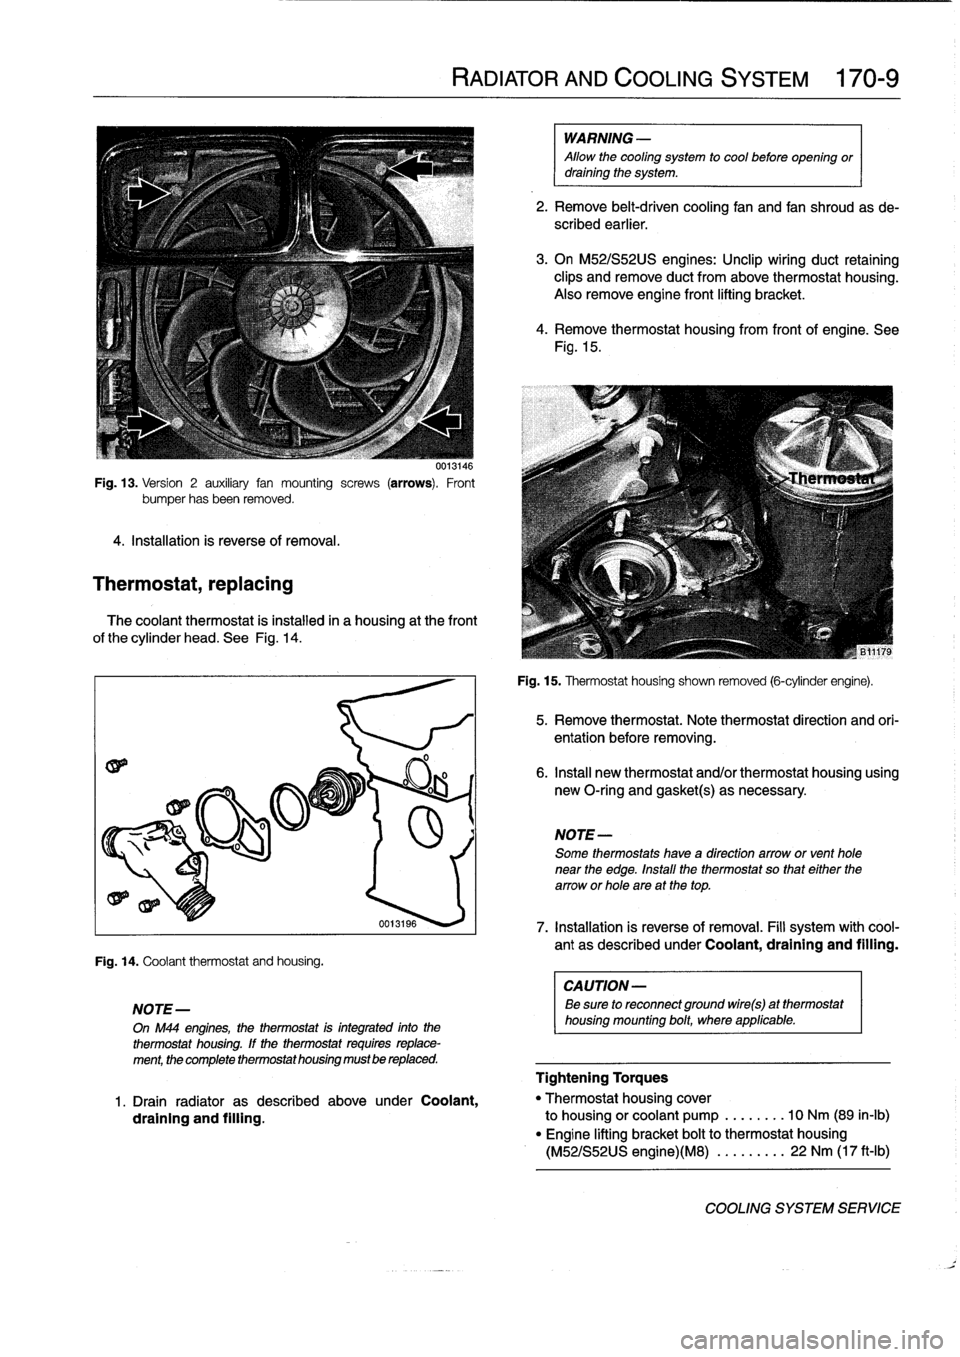 BMW M3 1992 E36 Workshop Manual 
Fig
.
13
.
Version
2
auxiliary
fan
mounting
screws
(arrows)
.
Front
bumper
hasbeen
removed
.

4
.
Installation
is
reverse
of
removal
.

Thermostat,
replacing

0013146

The
coolant
thermostat
is
insta